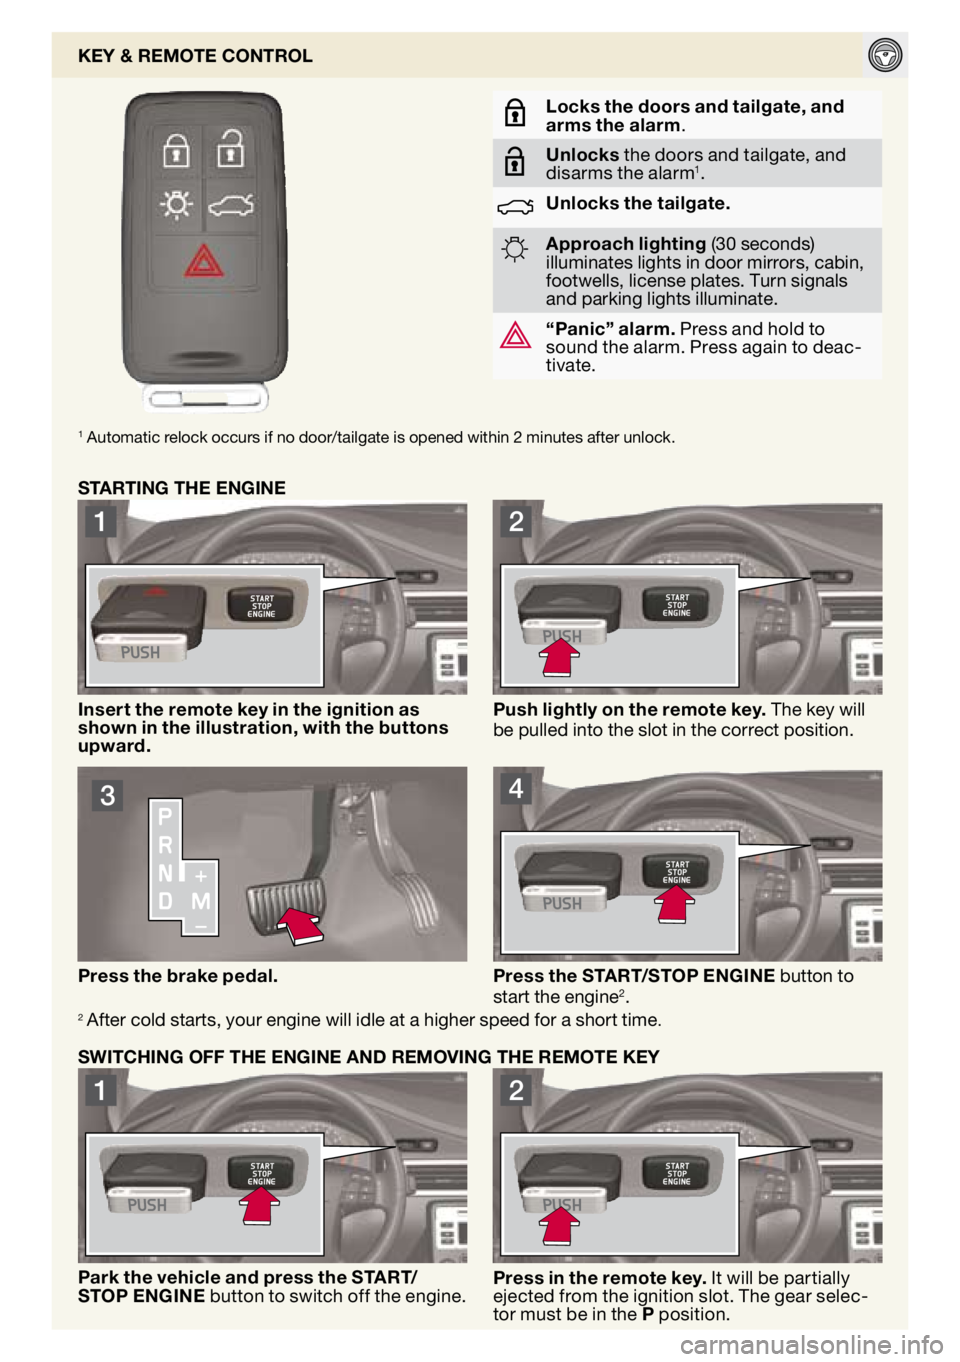 VOLVO V70 2009  Quick Guide 
1
2

3
4

1
2

key & remote control
locks the doors and tailgate, and arms the alarm.
Unlocks the doors and tailgate, and disarms the alarm1.
Unlocks the tailgate.
Approach lighting (30 seconds) illu